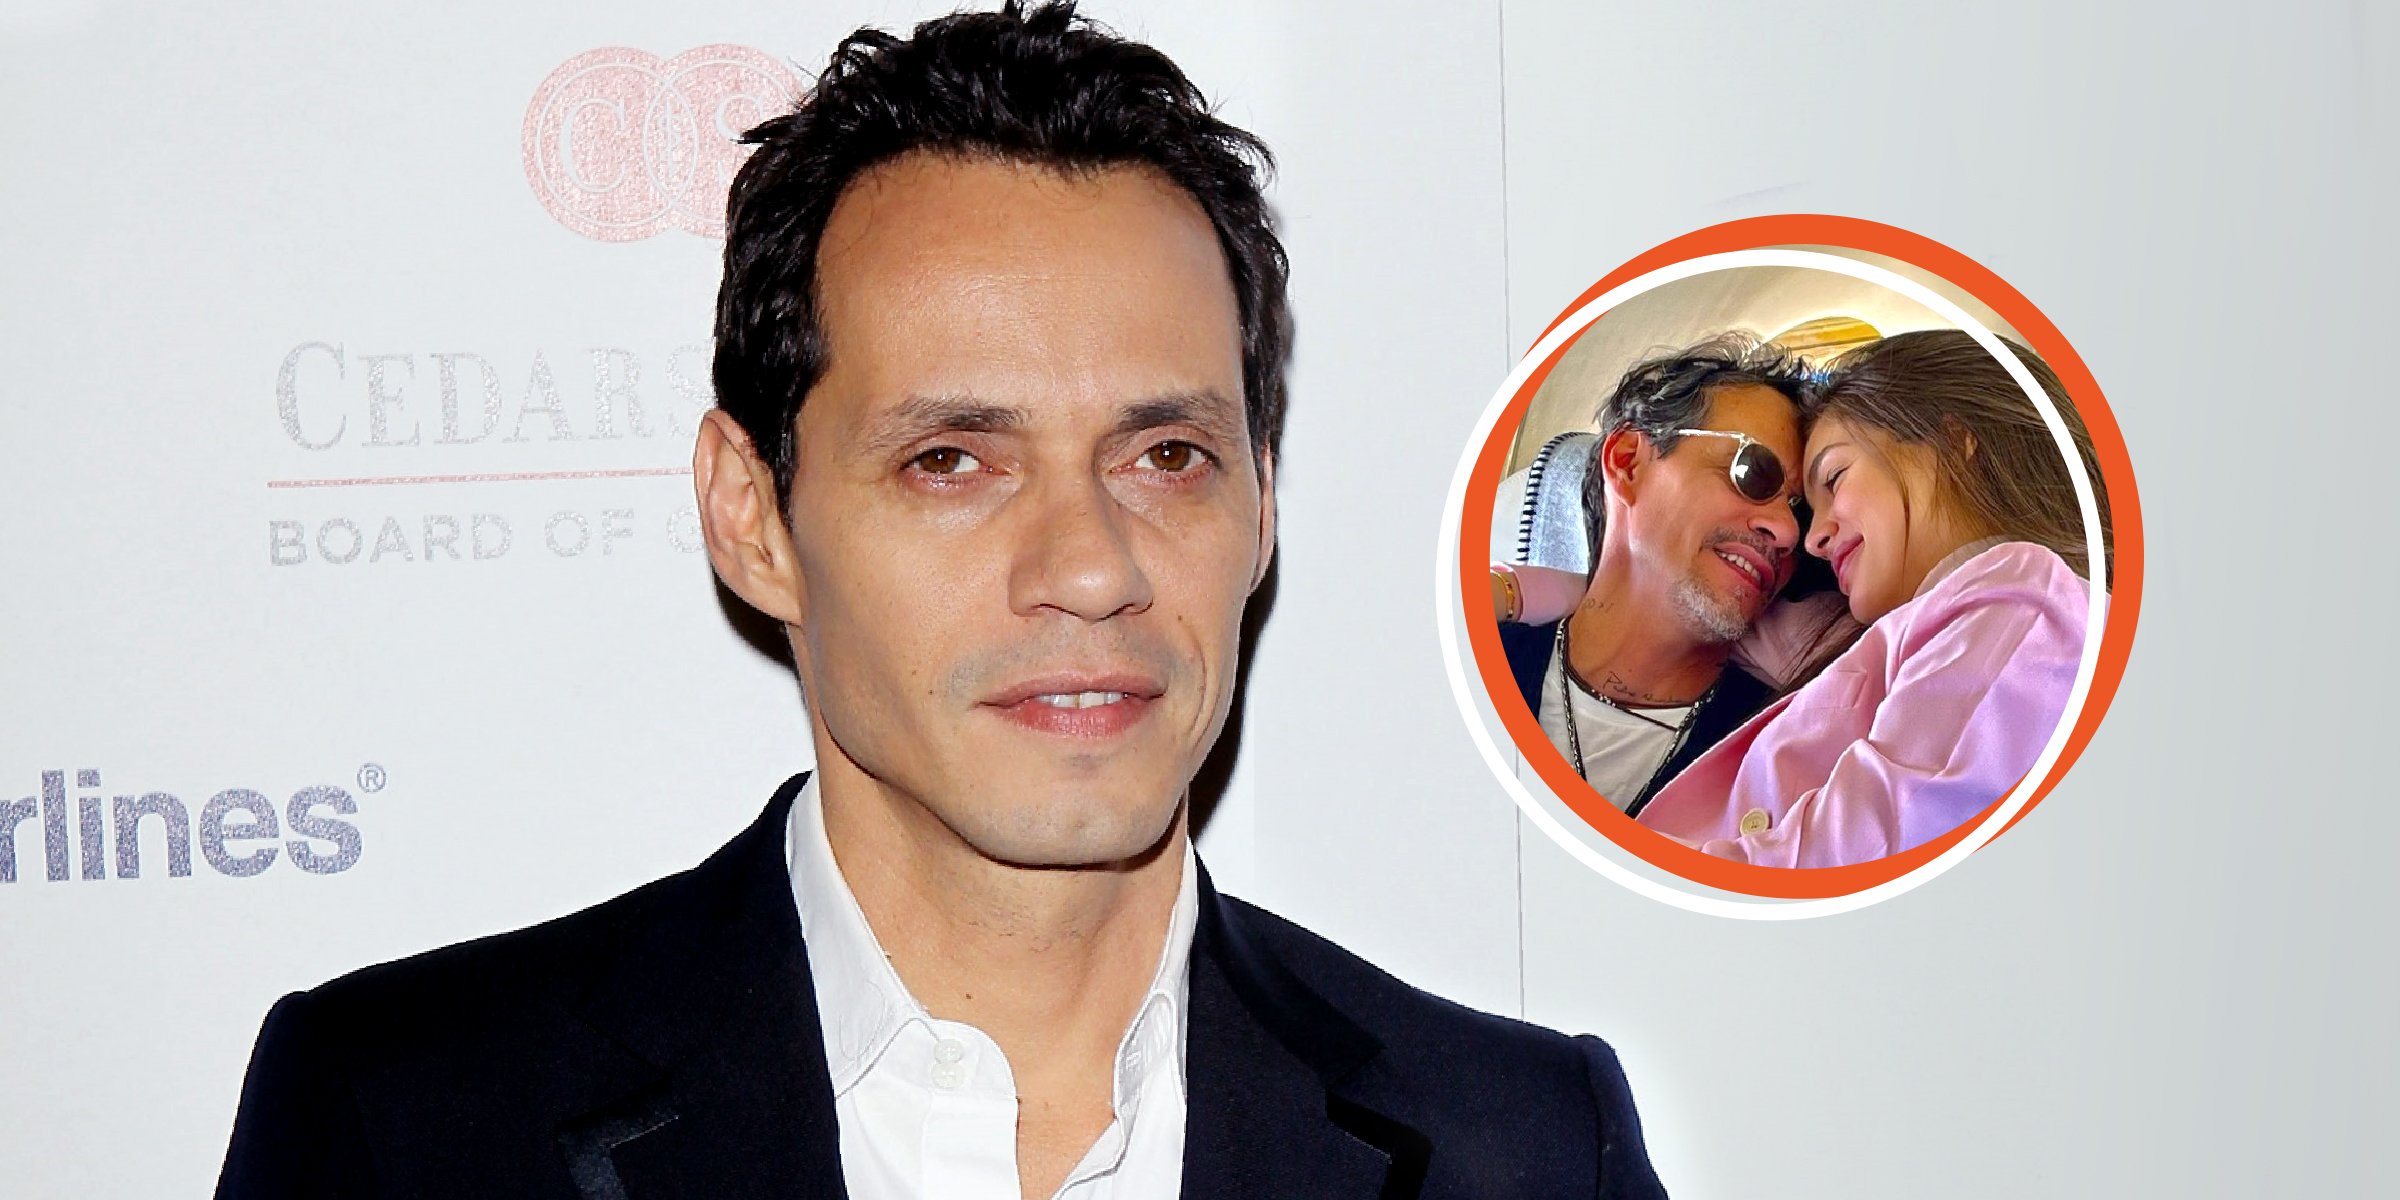 instagram.com/marcanthony | Getty Images